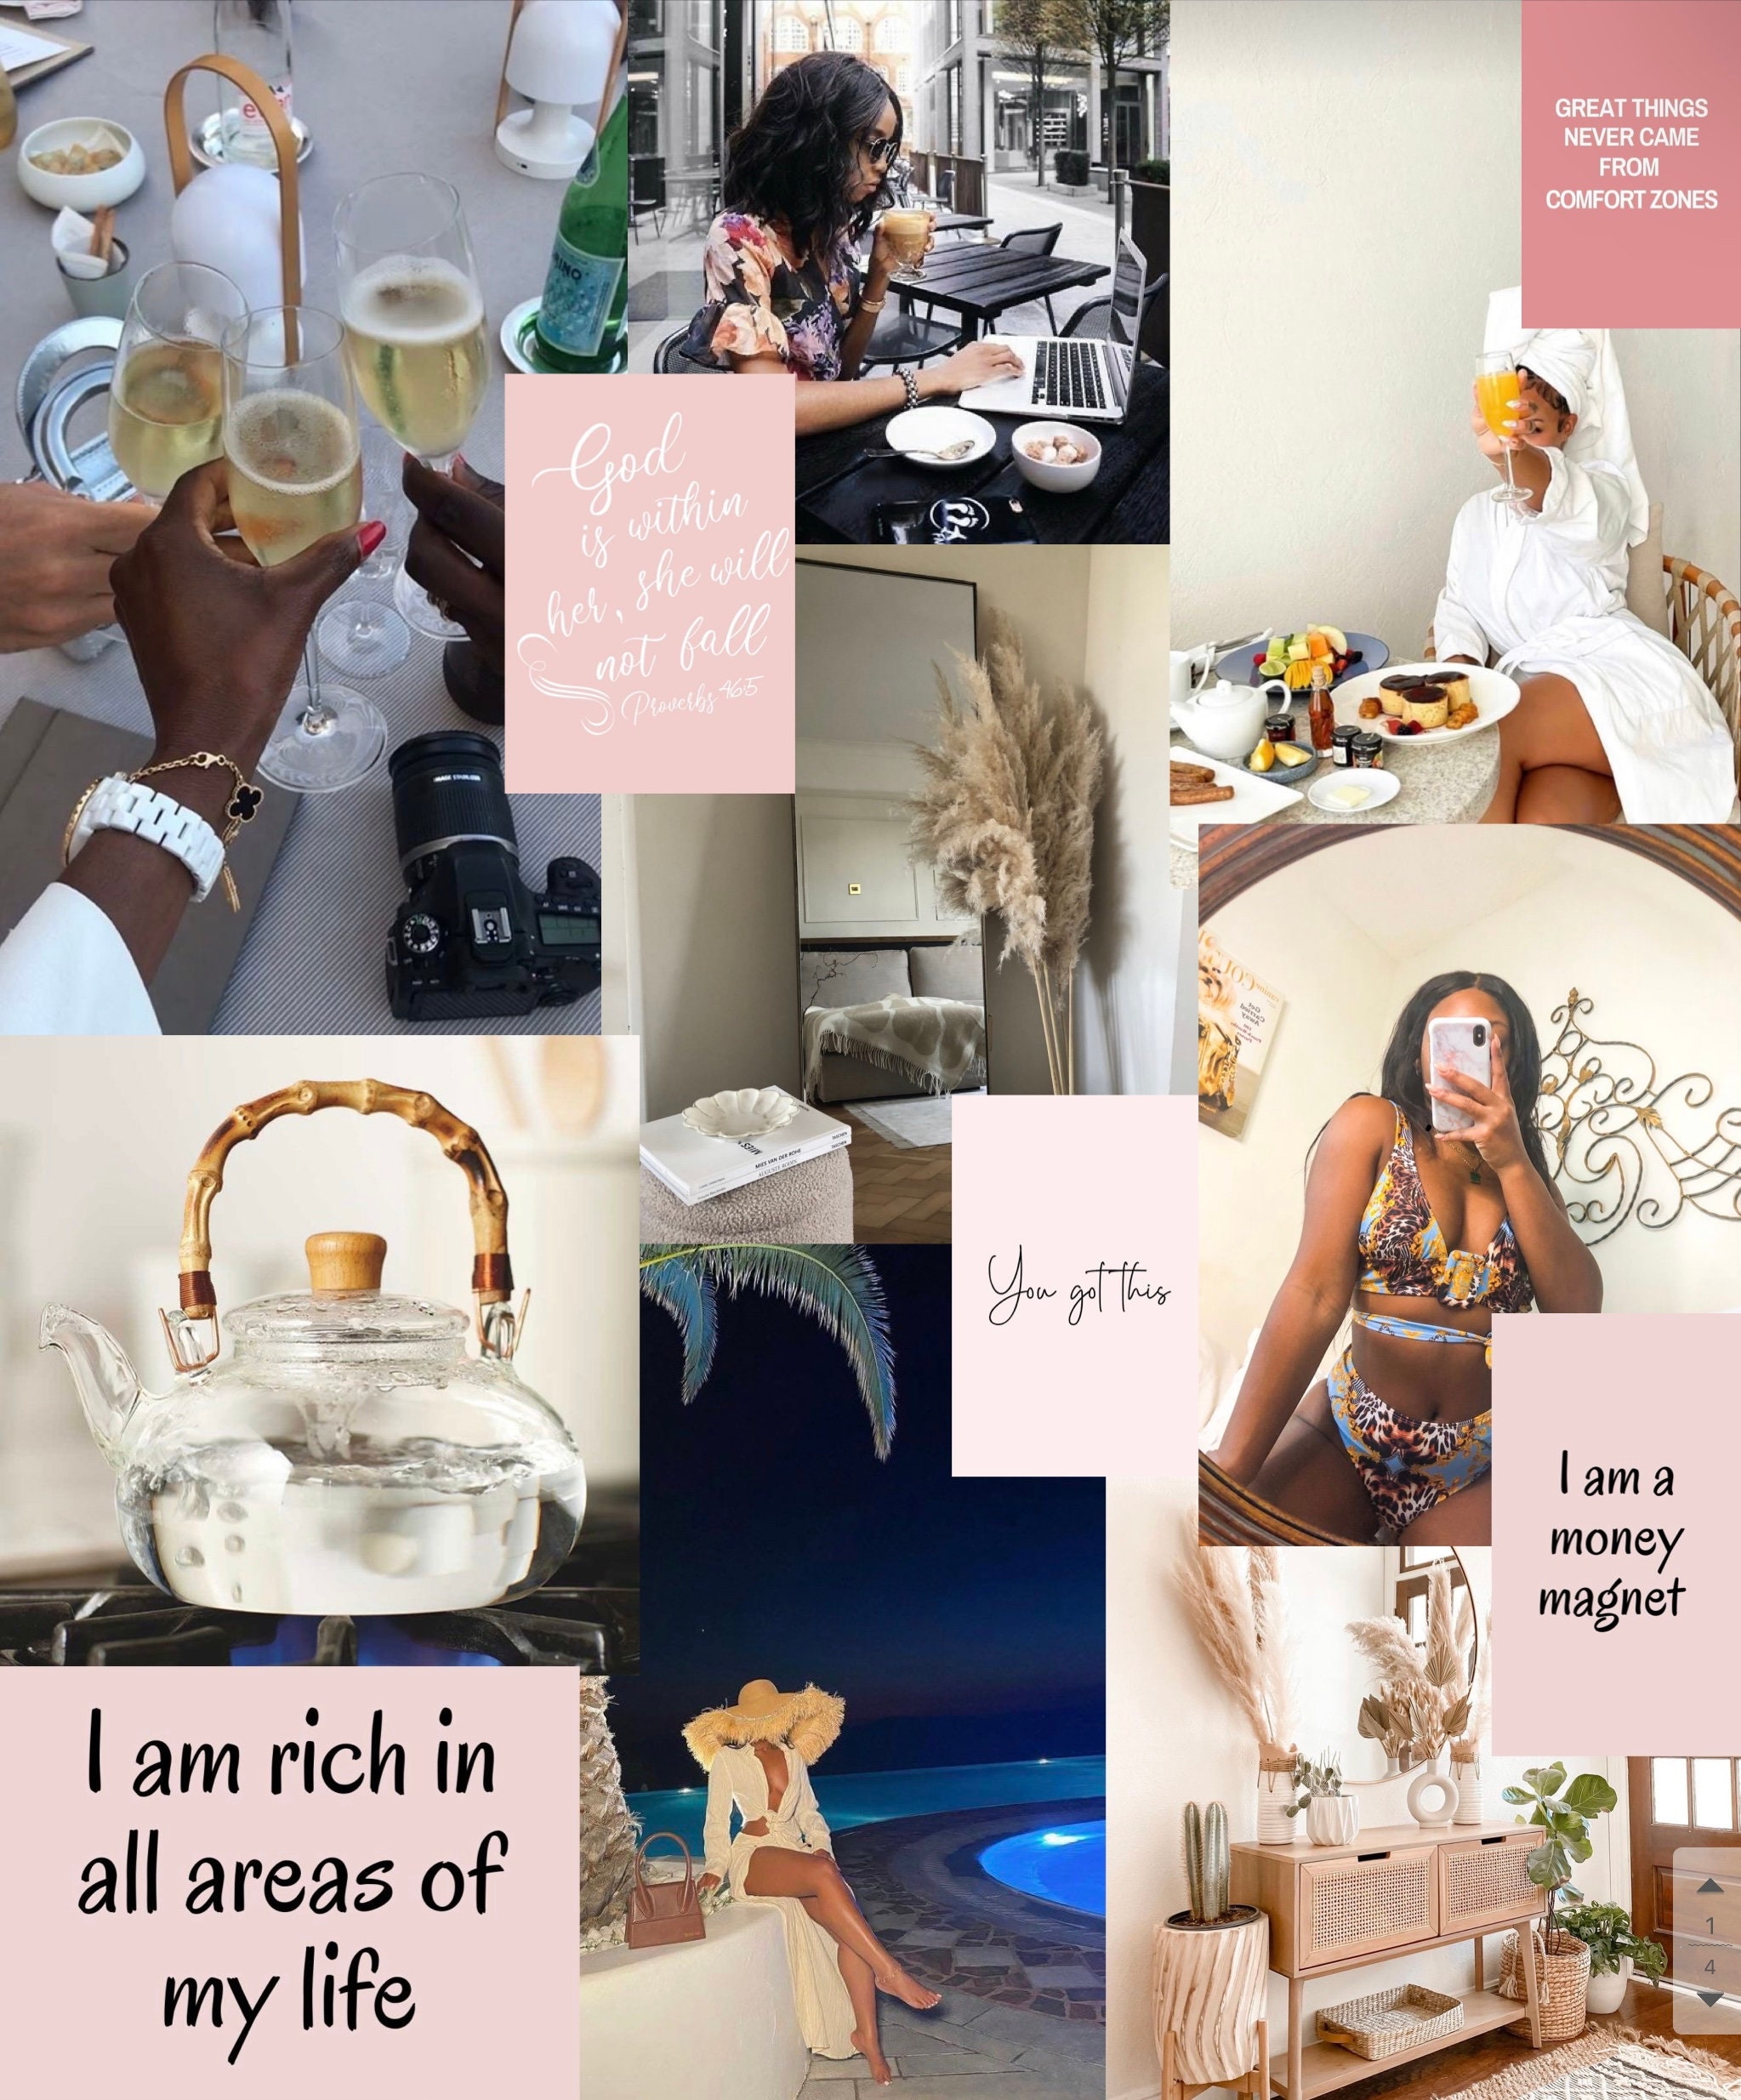 Vision Board Supplies For Black Women: A Vision Board Kit To Visualize Your  Dreams And Goals ( Pictures & Words ): Buxton, Lyndon: 9798419234611:  : Books